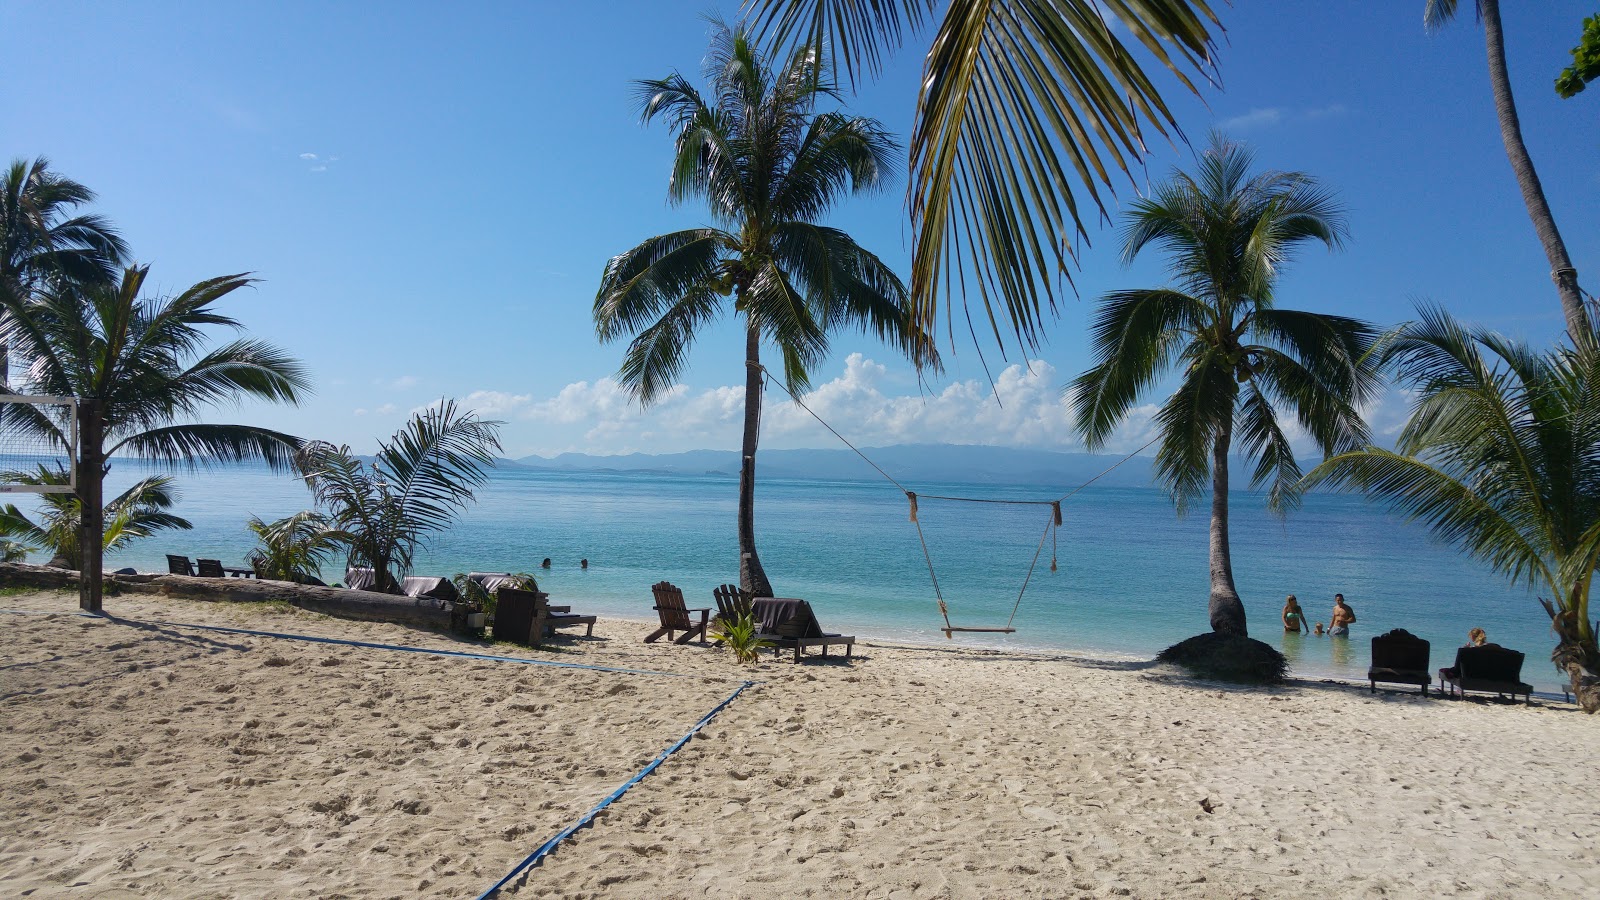 Photo of Rin Nai Beach - popular place among relax connoisseurs